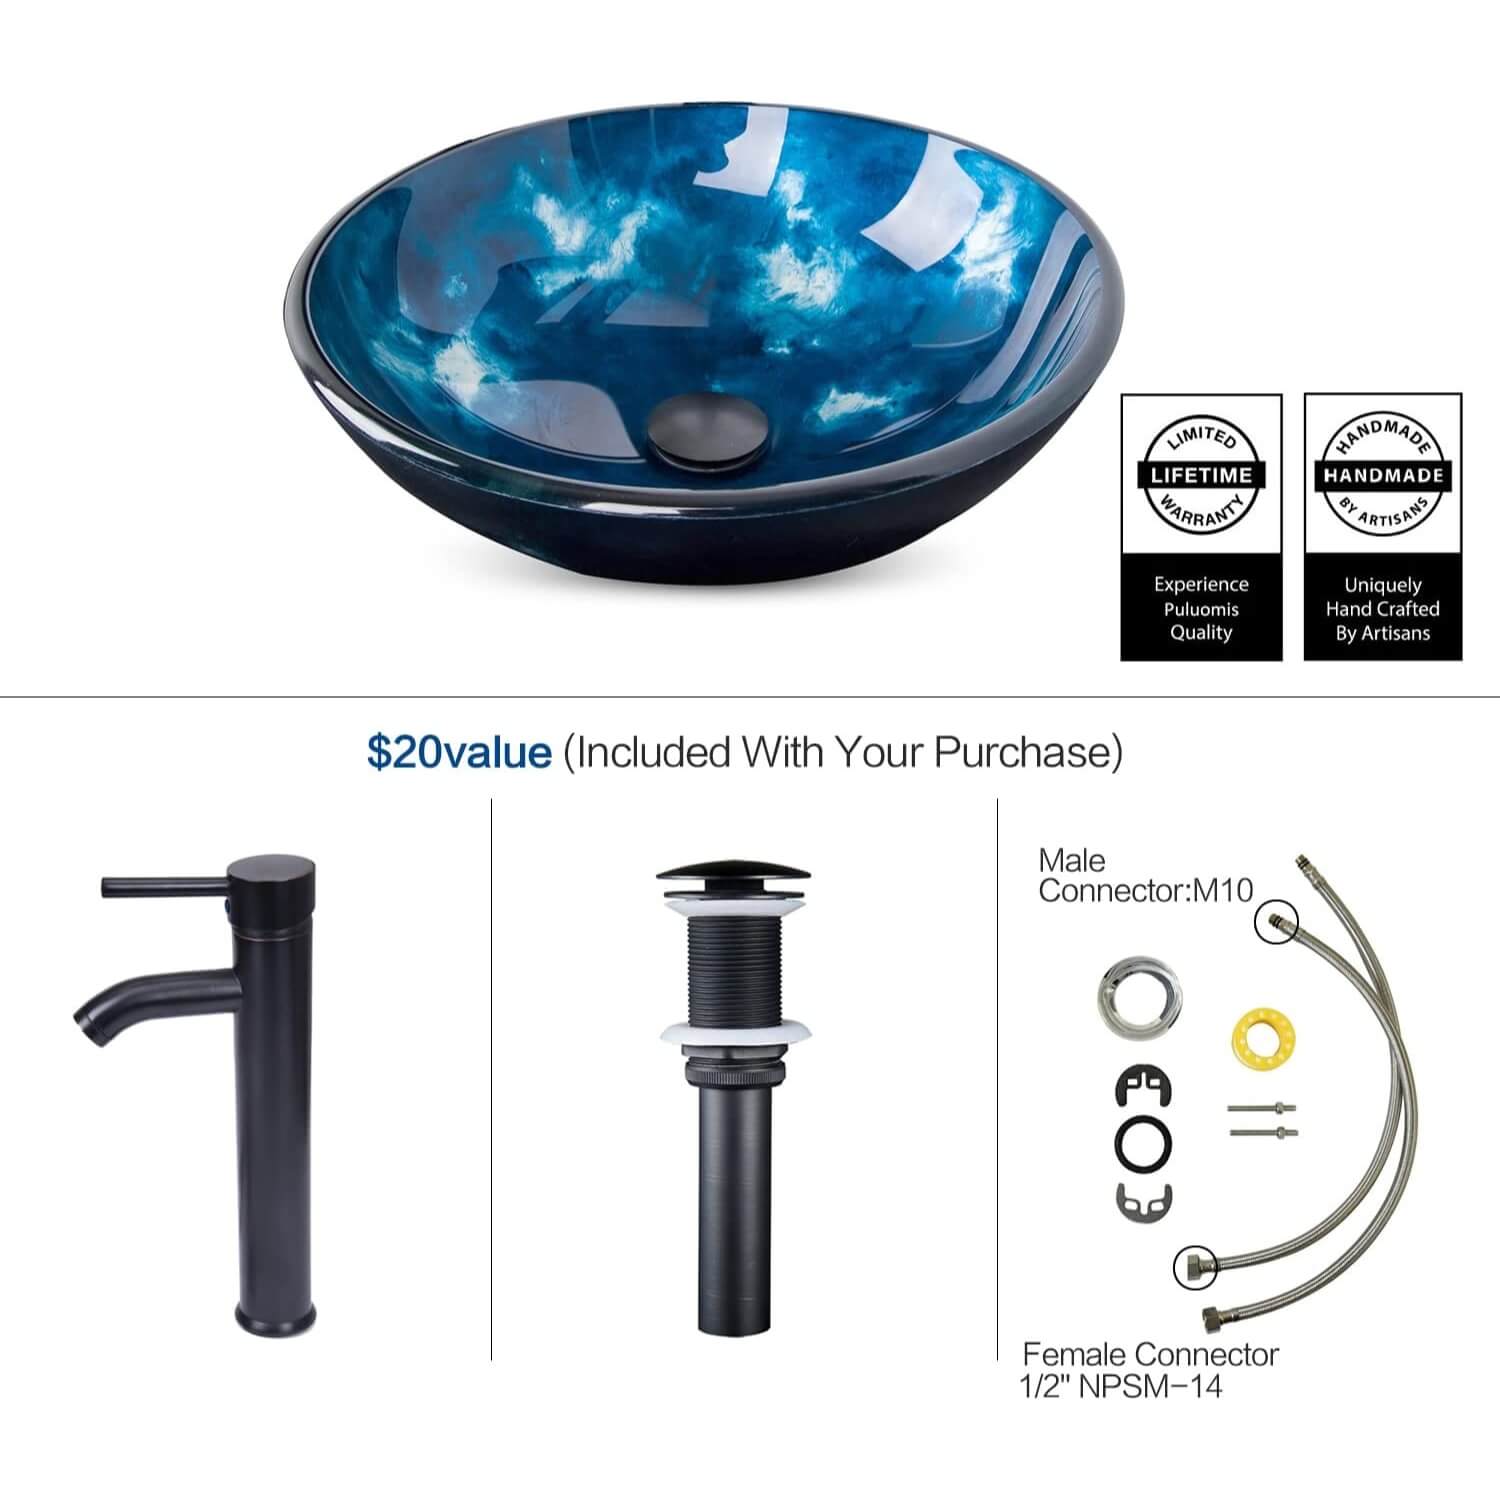 Elecwish blue glass sink included parts